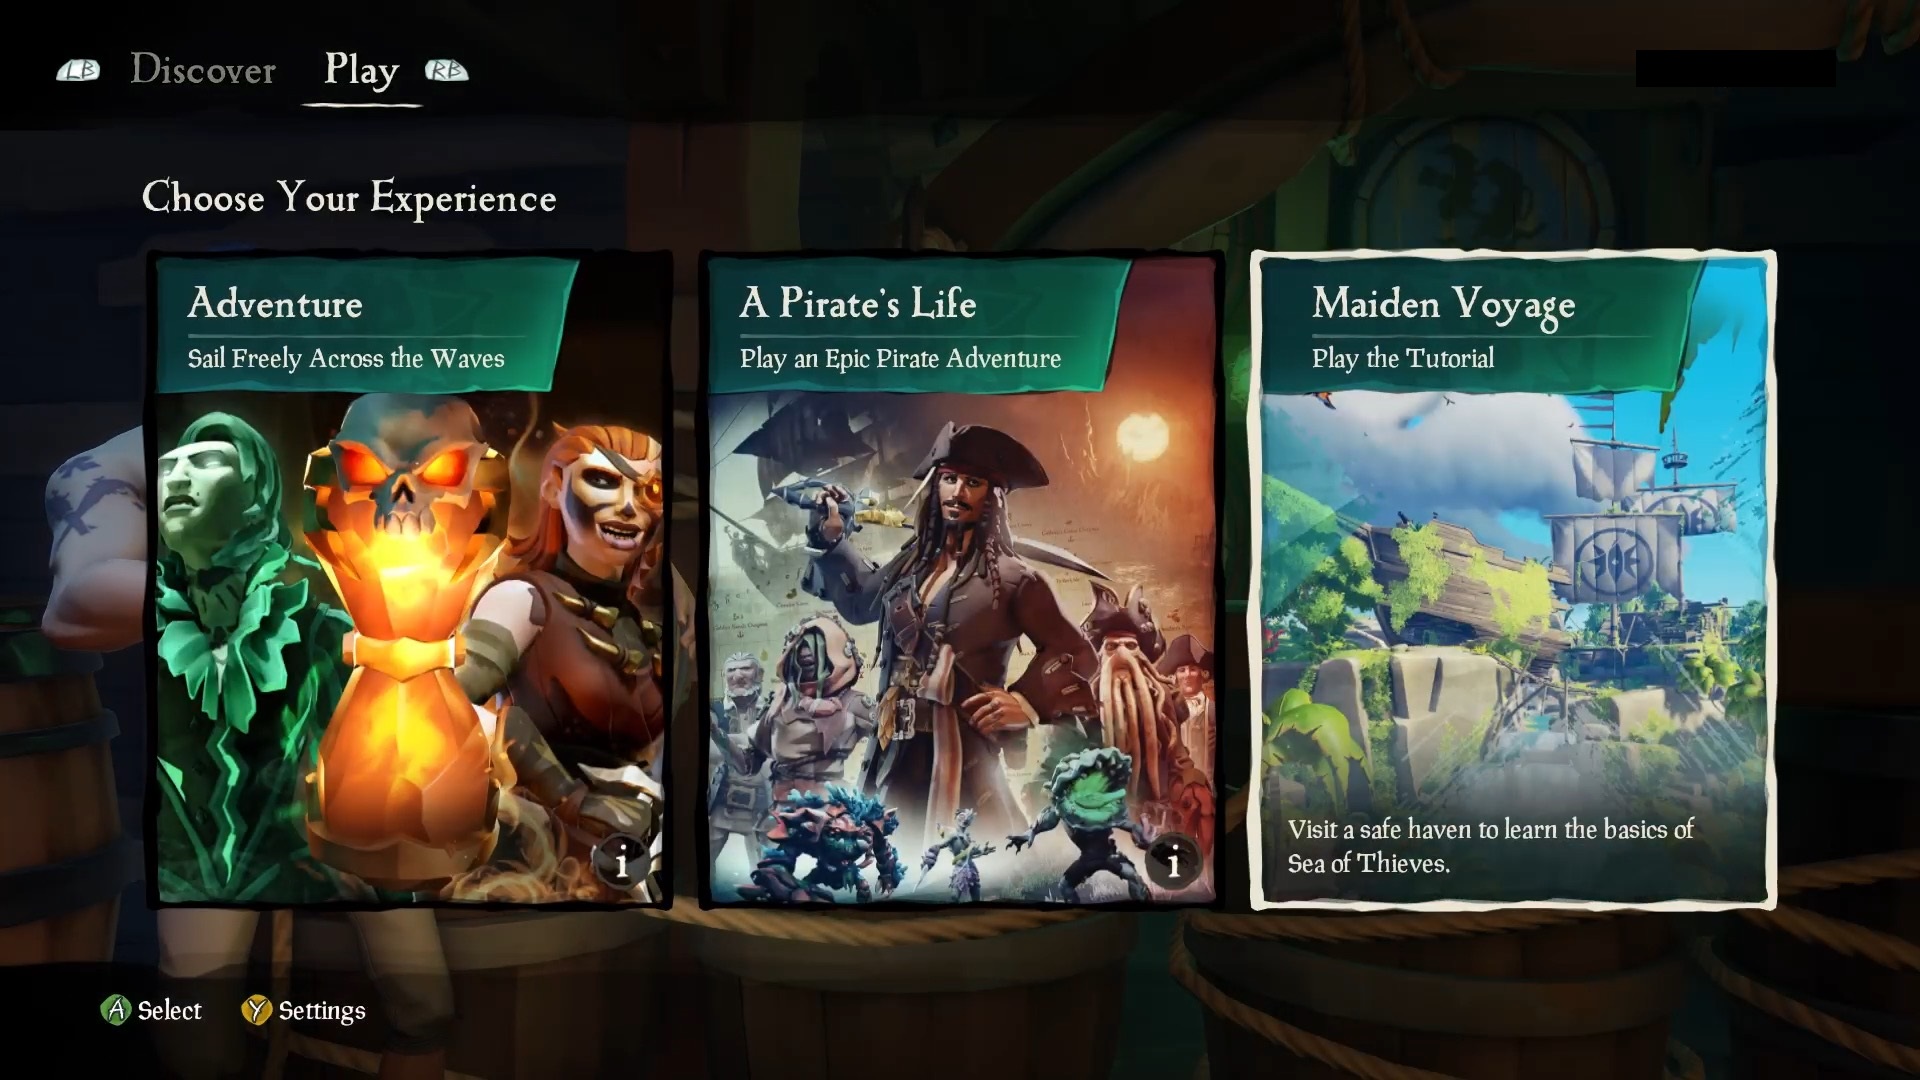 Screenshot of Sea of Thieves game showing Choose Your Experience with Maiden Voyage - Play the Tutorial selected. 